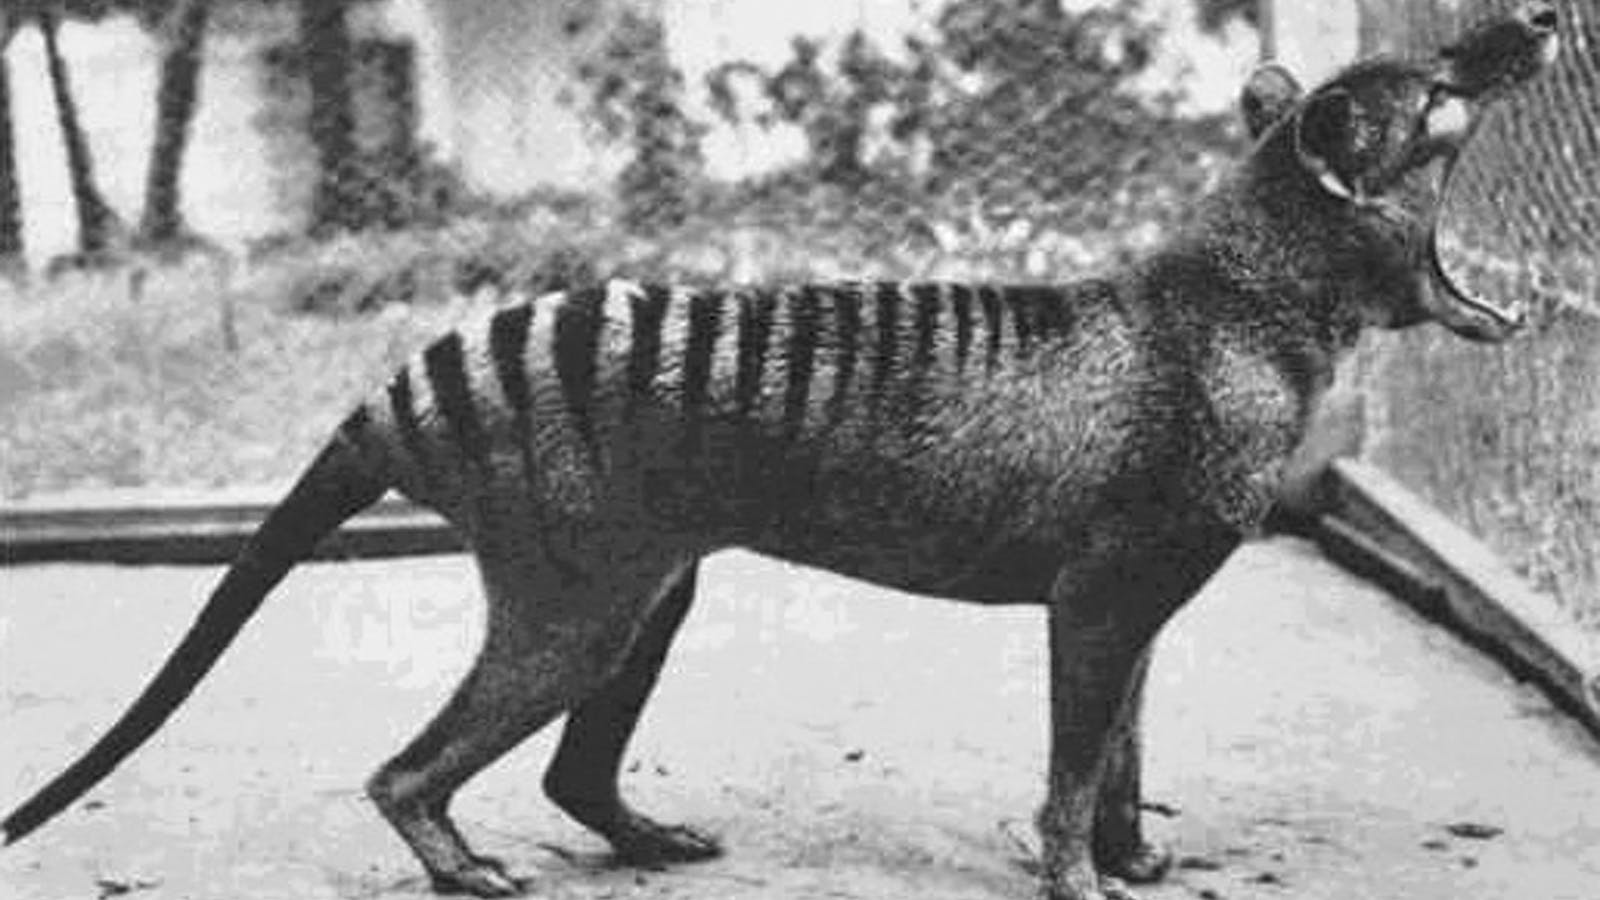 The Last Tasmanian Tiger Officially Went Extinct In 1936